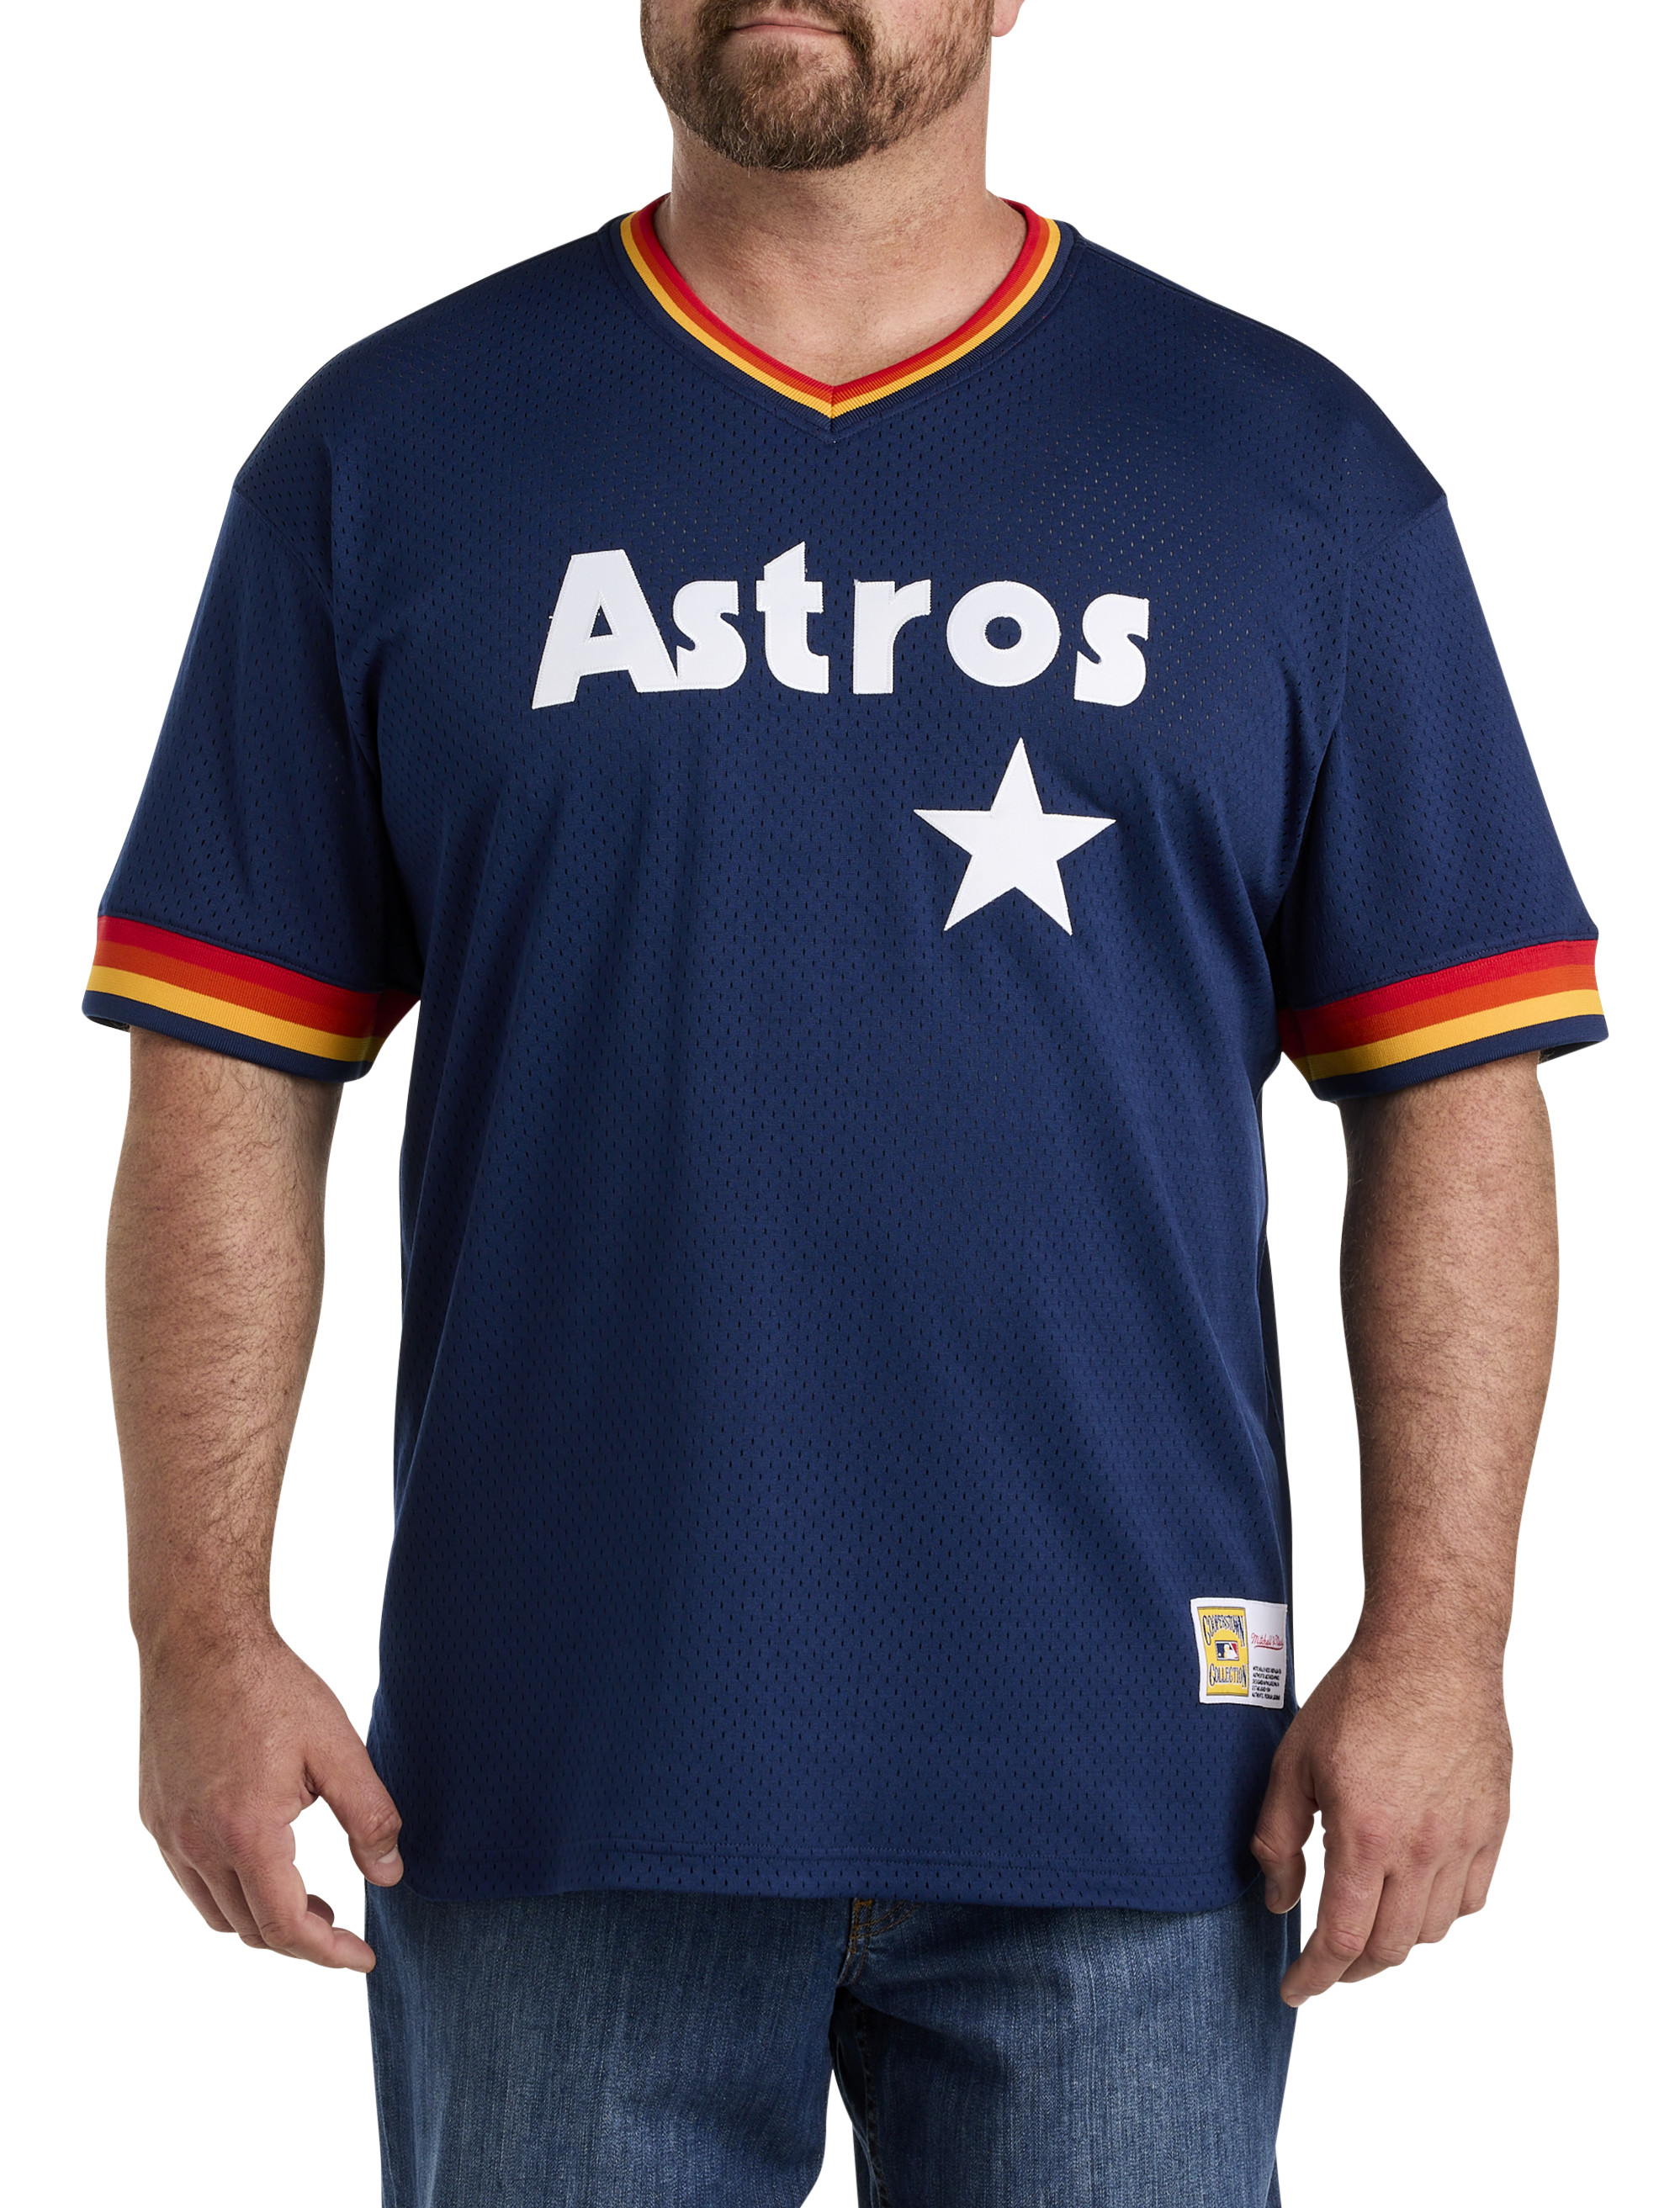 Majestic, Shirts, Throwback Majestic Astros Jersey